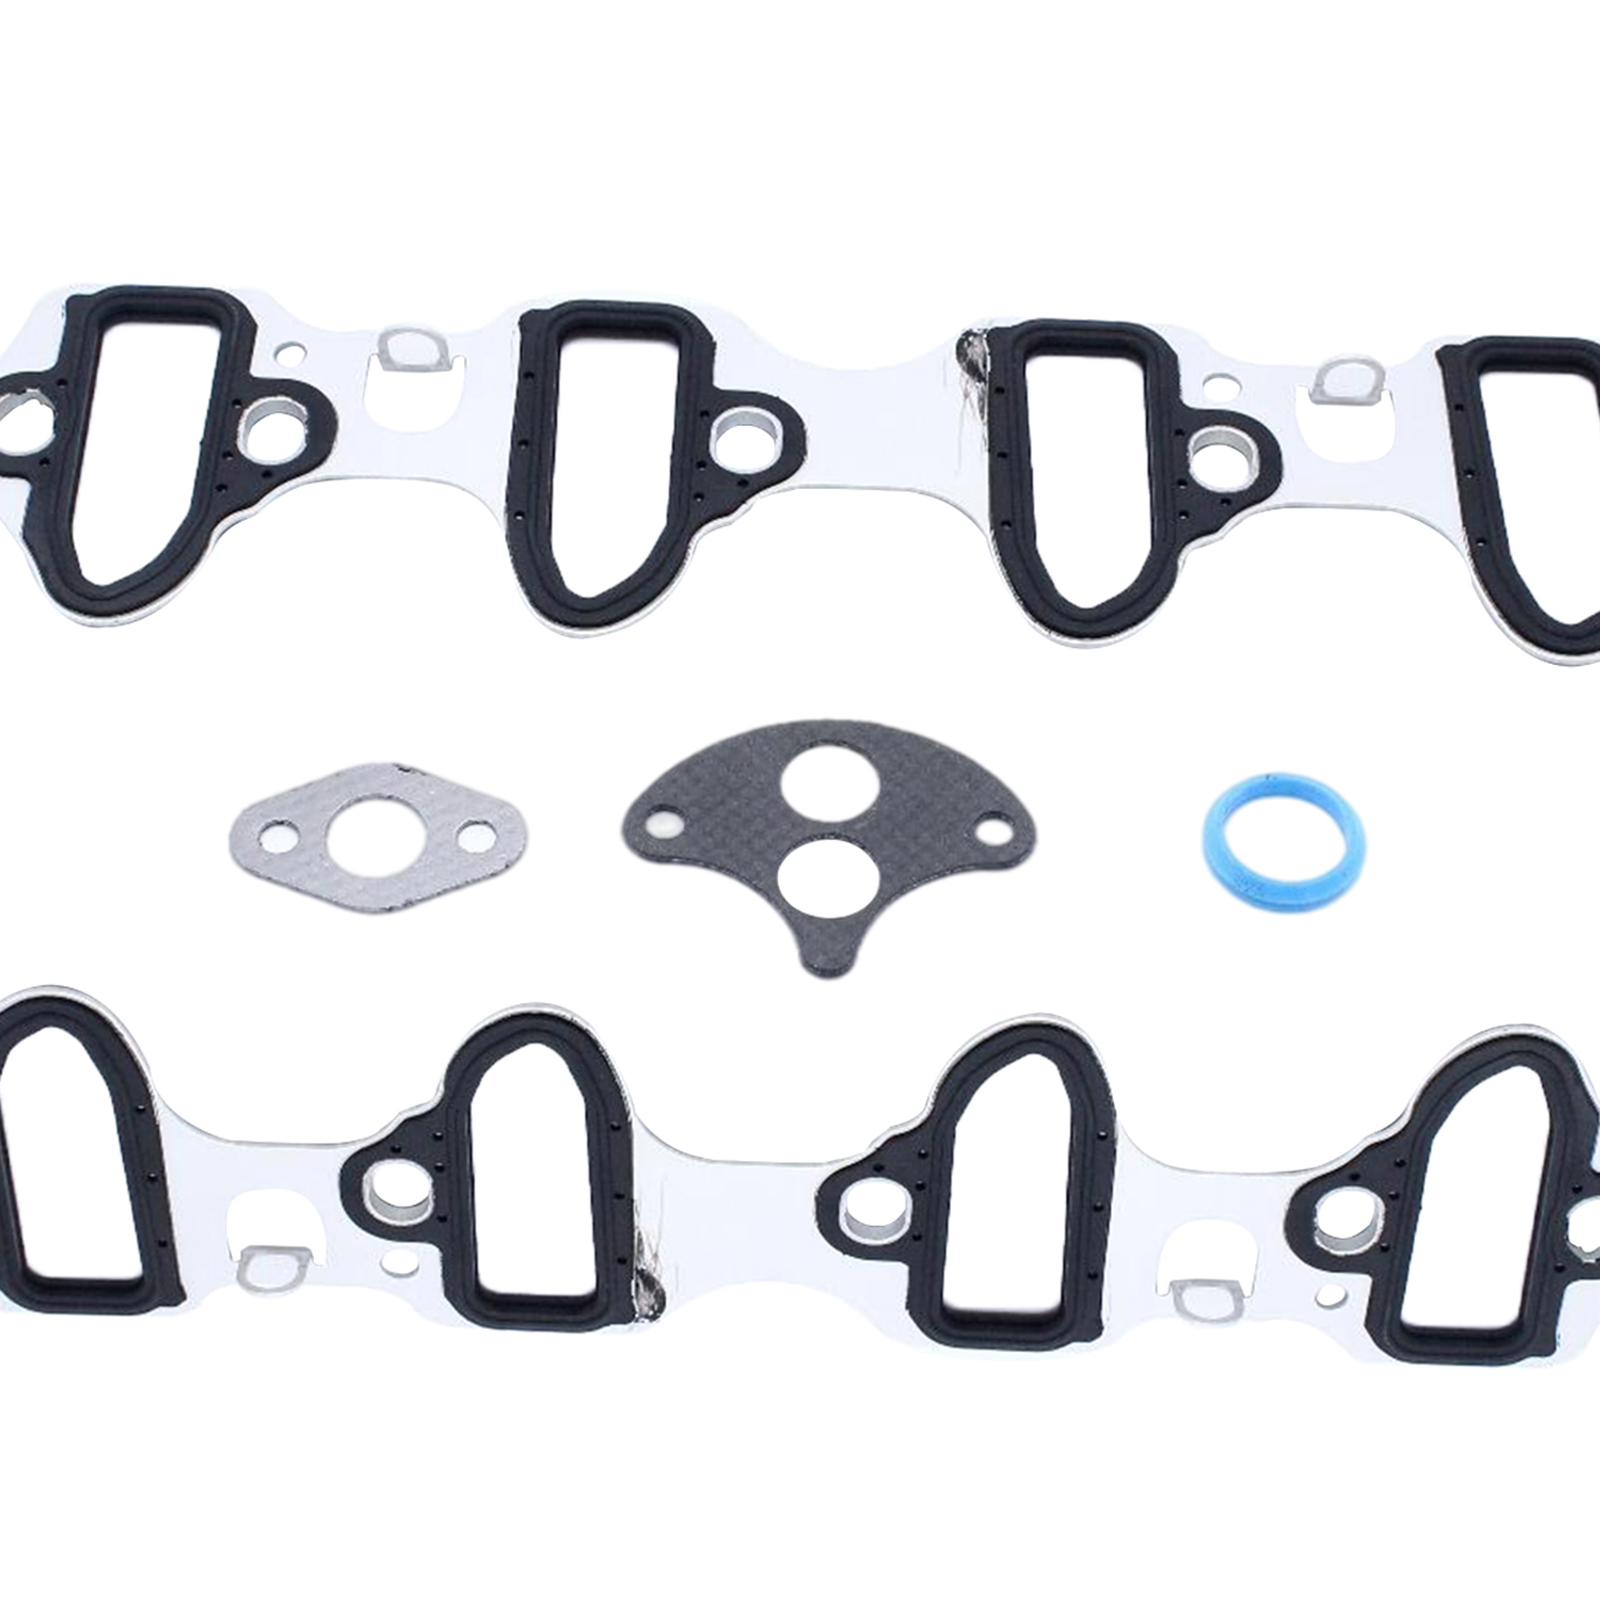 Intake Manifold Gasket MS98016T Replace for GMC Sierra for Suburban